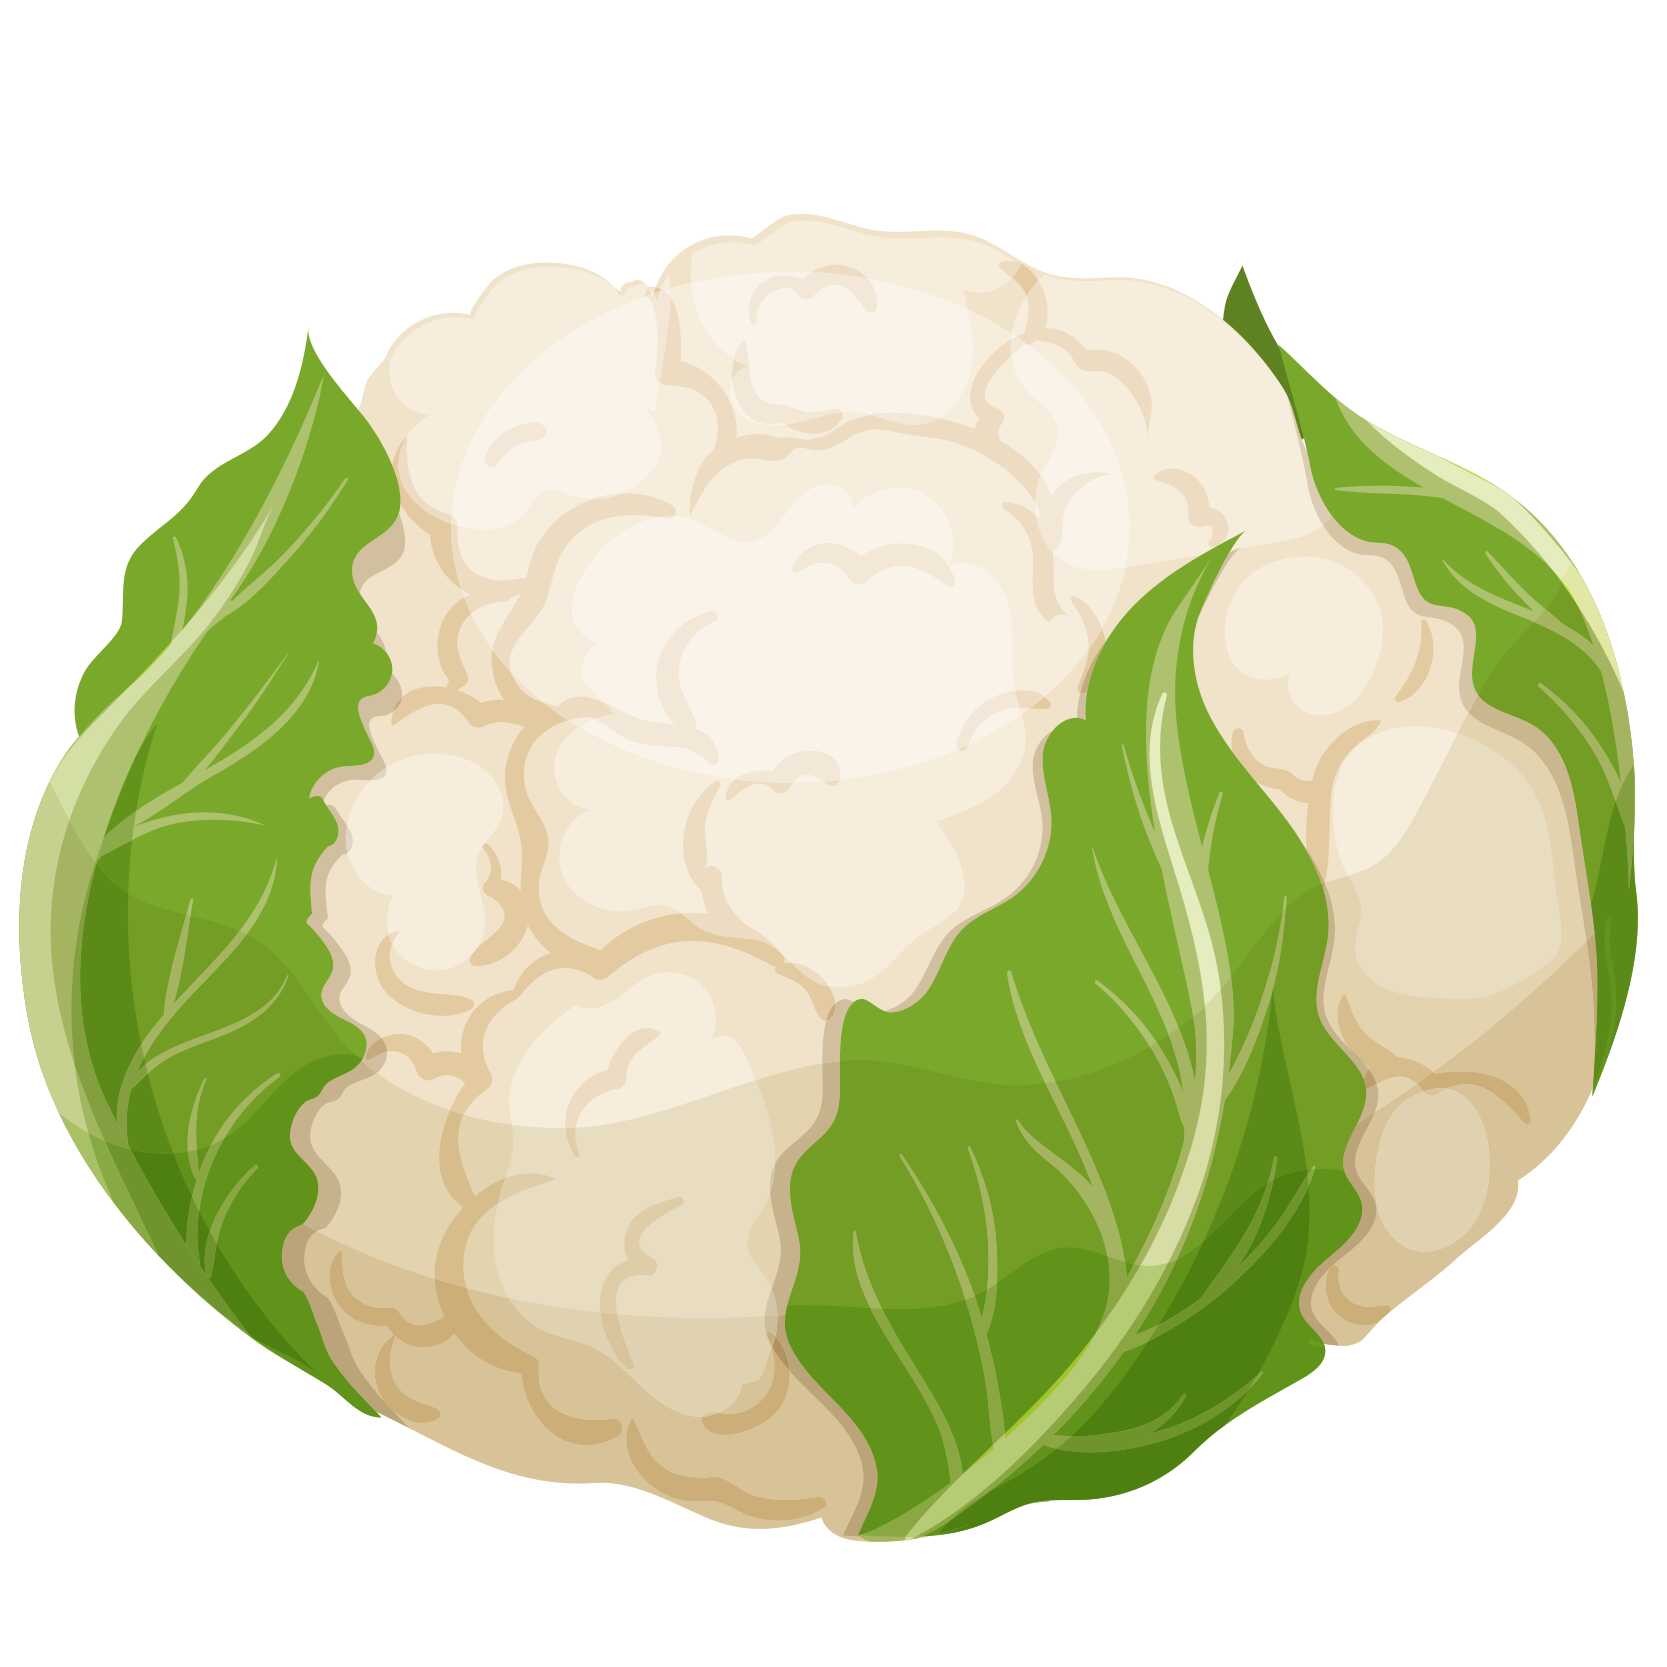 English vocabulary with pictures - Vegetables - Cauliflower